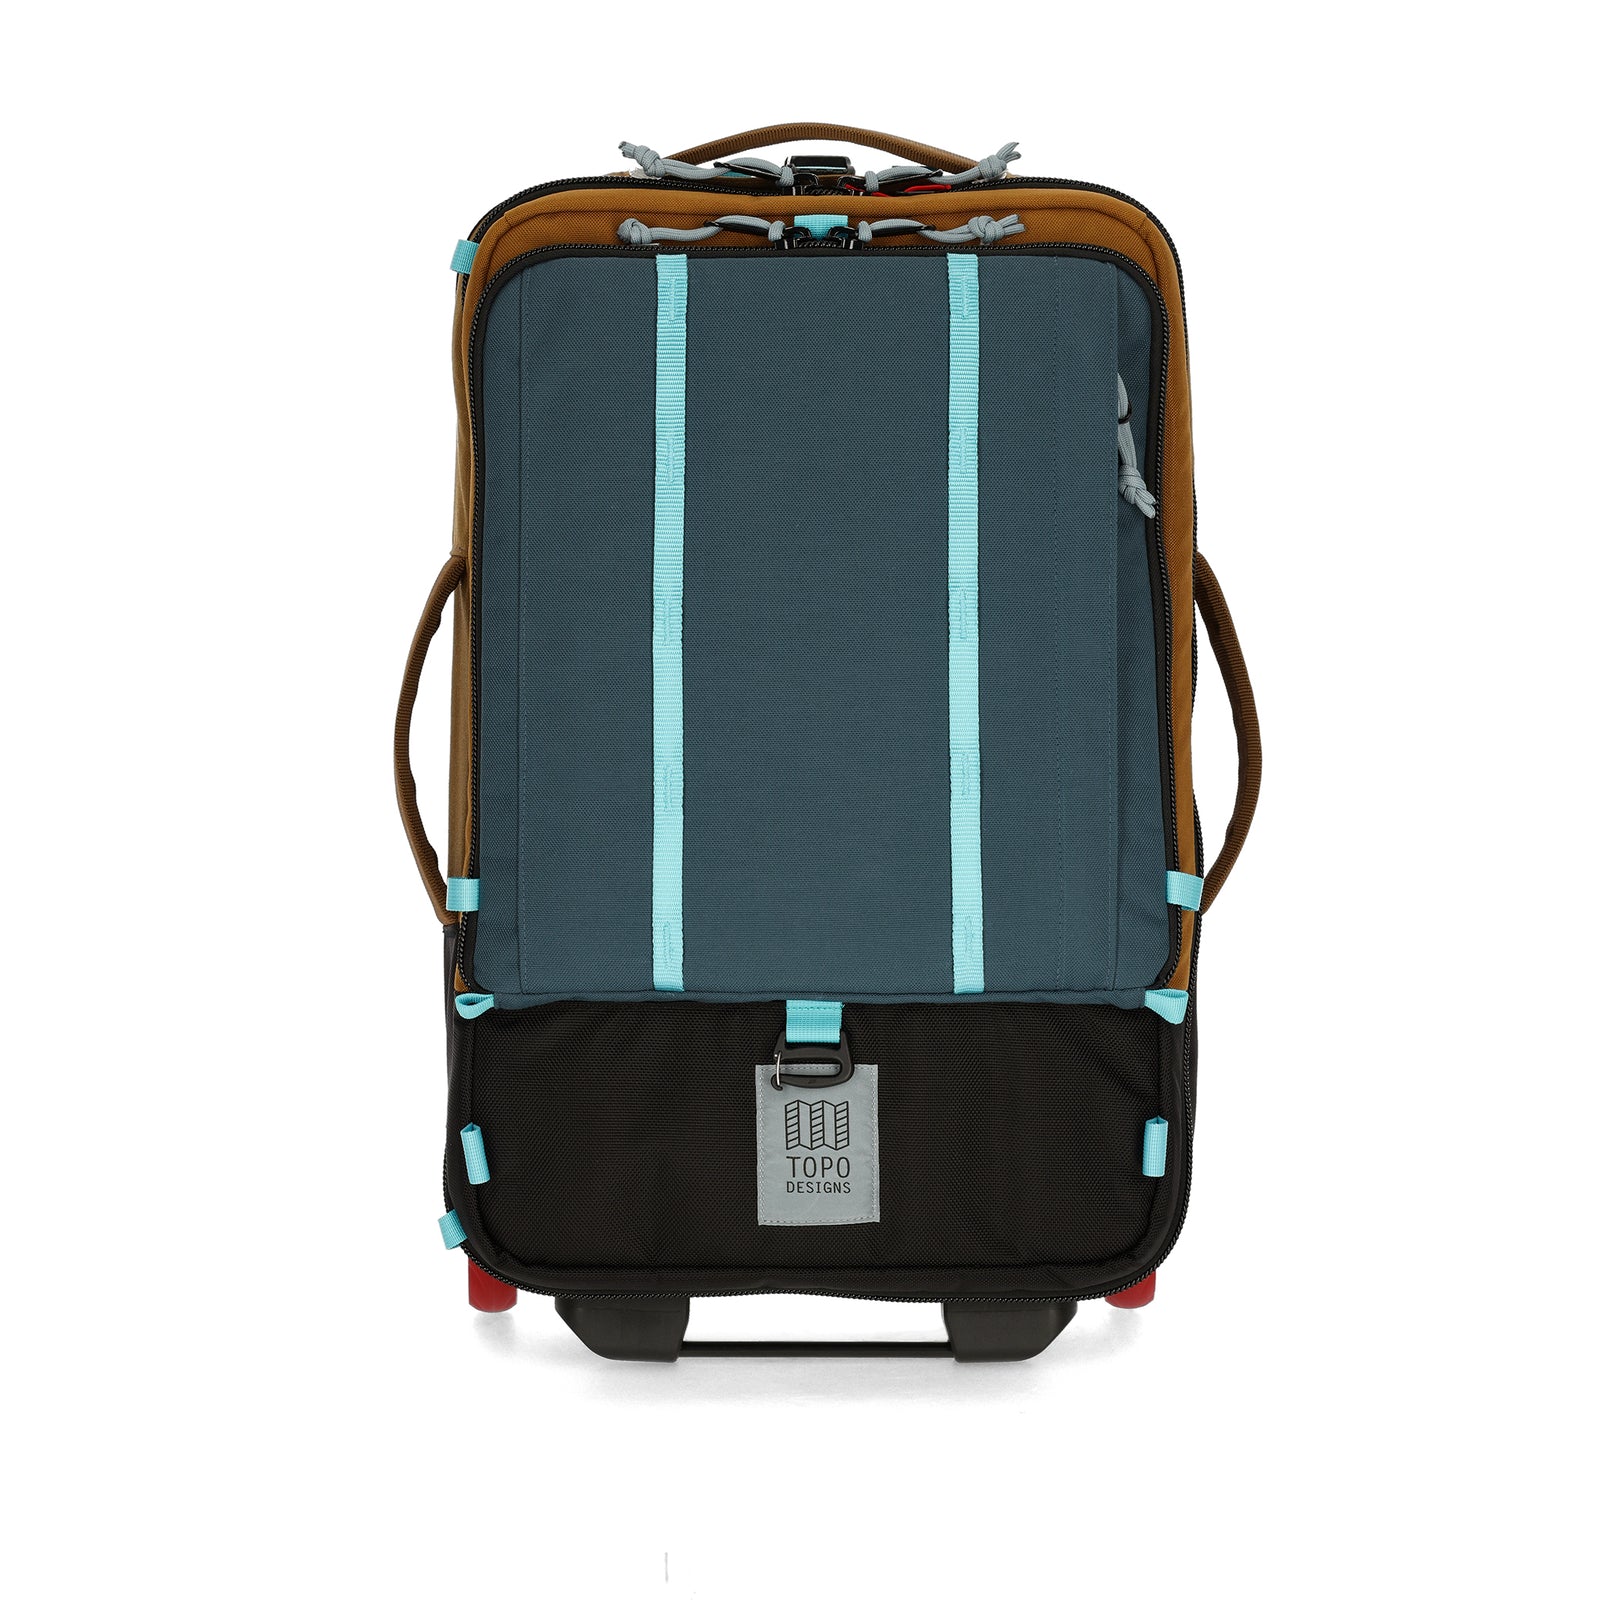 Topo Designs Global Travel Bag Roller durable carry-on convertible laptop backpack rolling suitcase in "Desert Palm / Pond Blue"